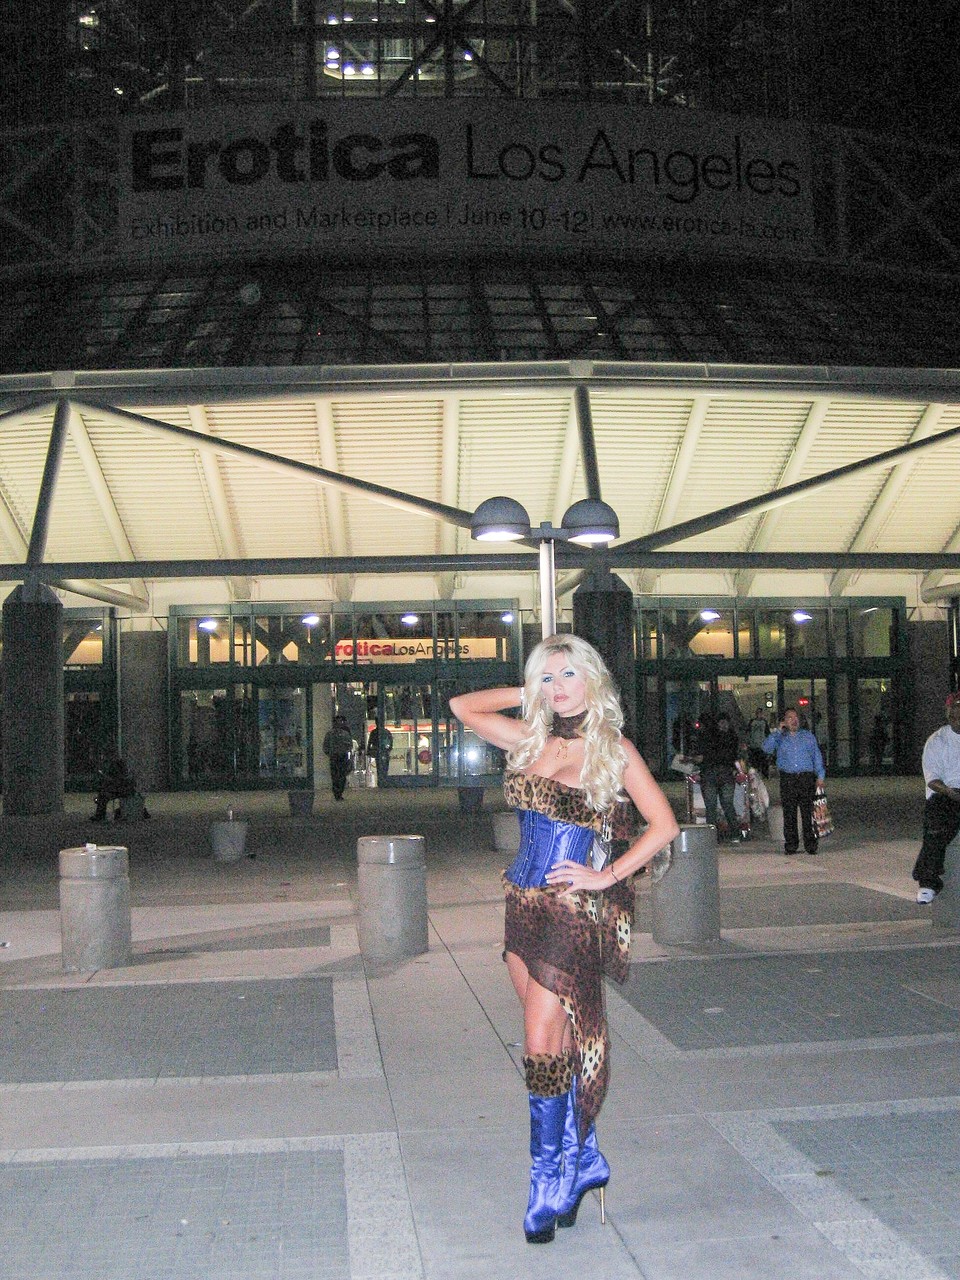 My Brittany Andrews Brittany Andrews porn photo #425347621 | My Brittany Andrews Pics, Brittany Andrews, Skirt, mobile porn